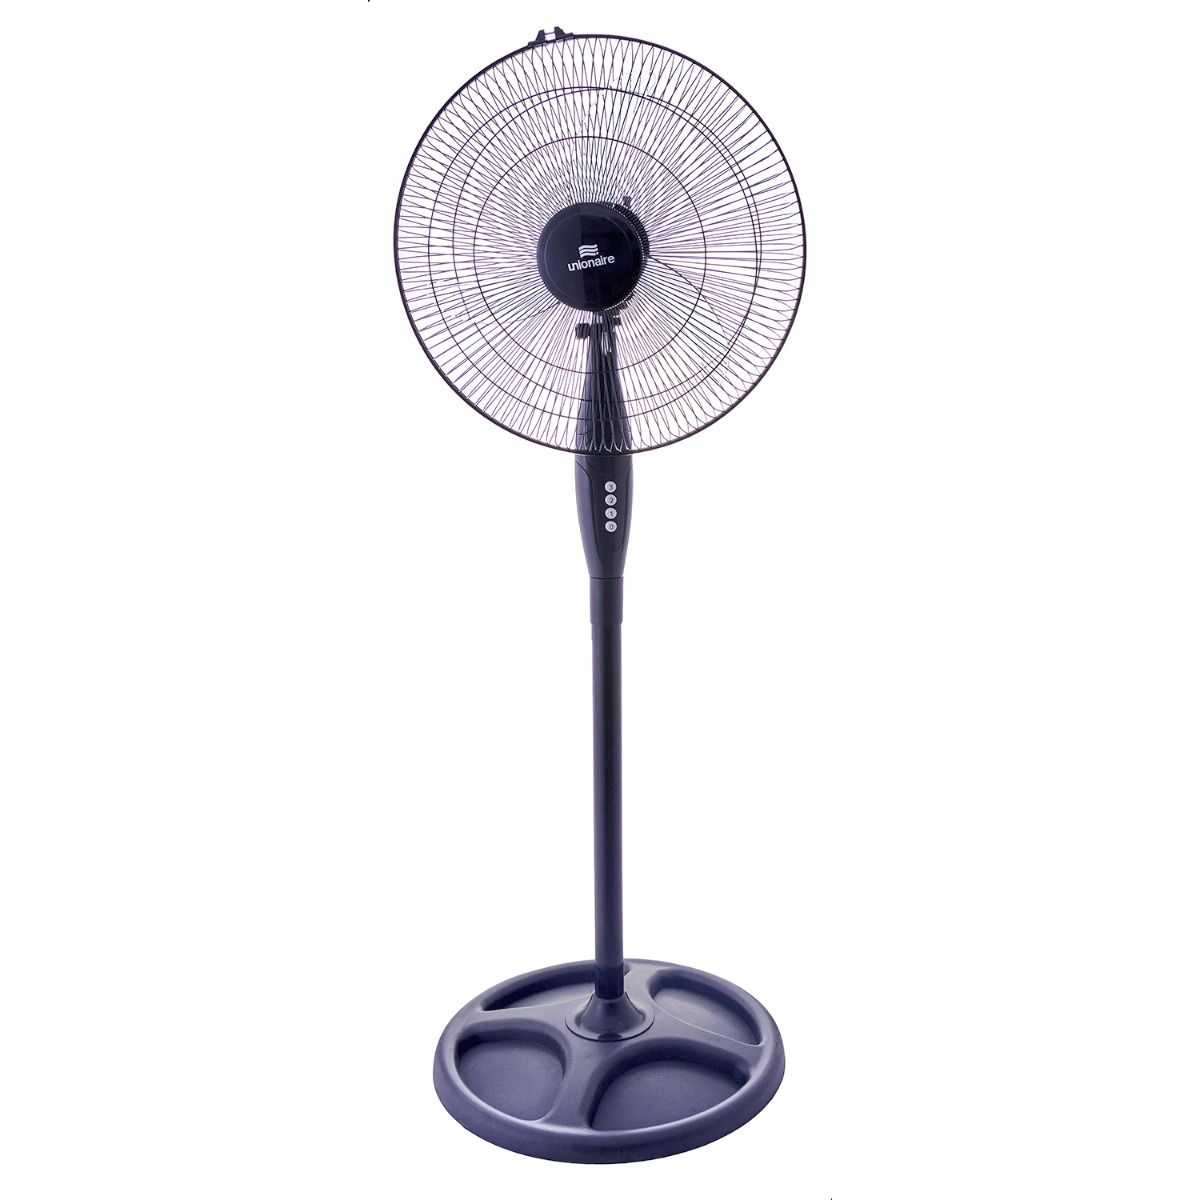 Stand Fan 18? 3 Speeds ? from unionaire